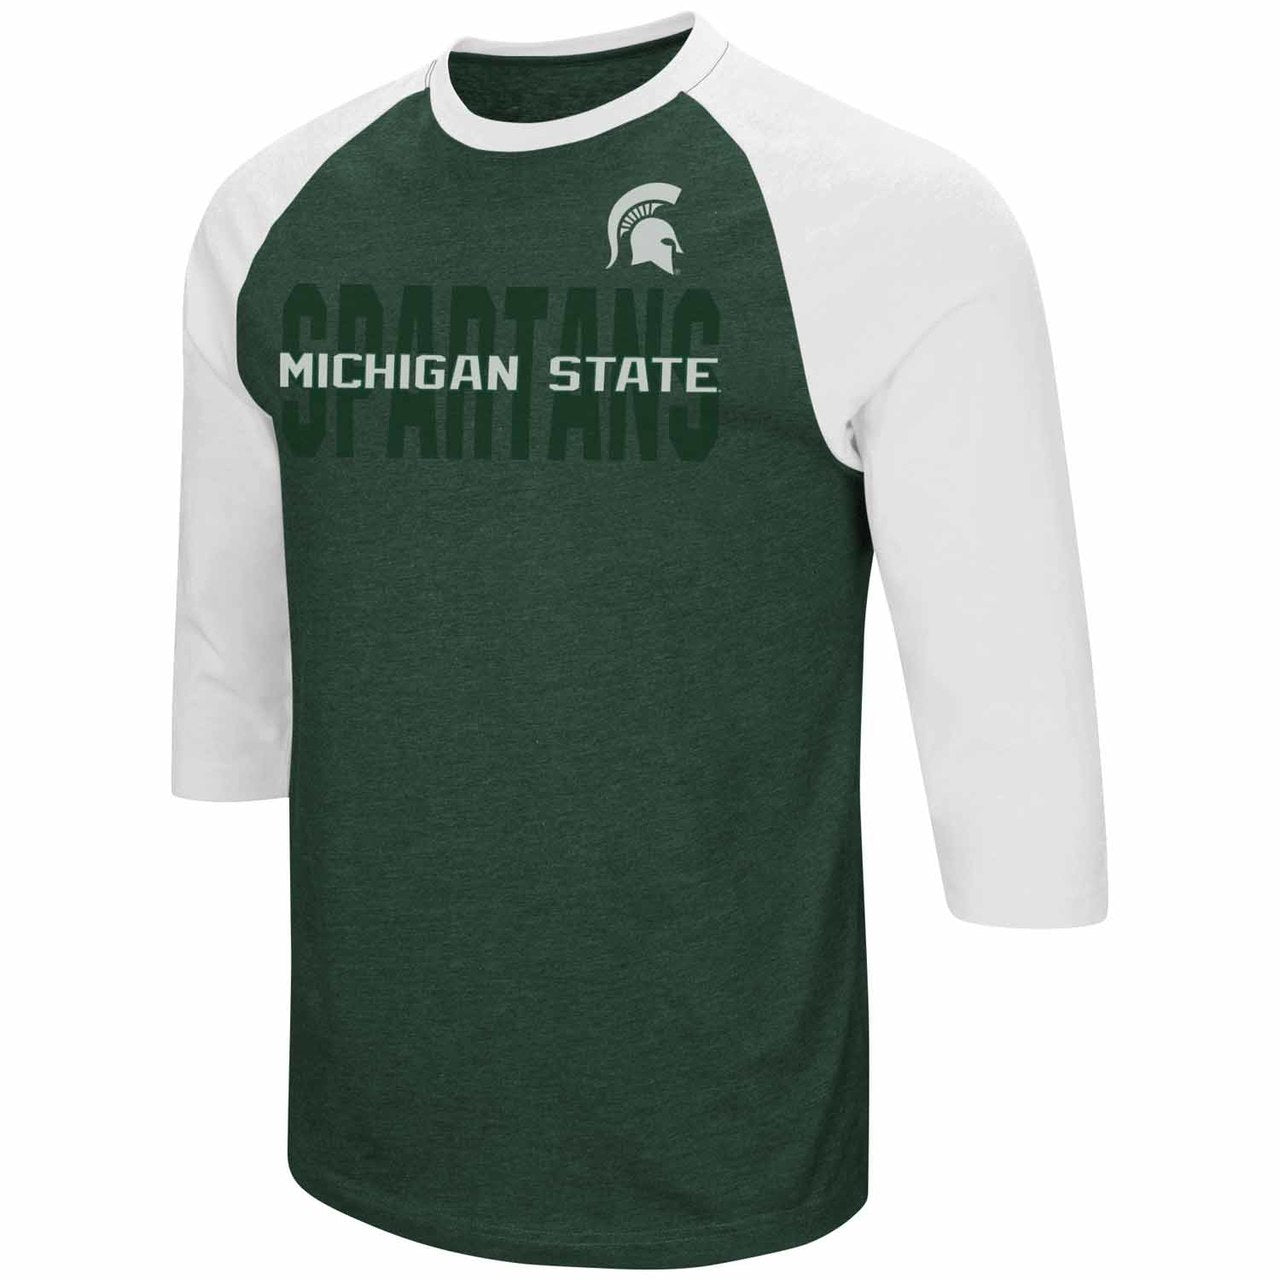 Michigan State Spartans  Adult NCAA Steal Home 3/4 Sleeve Shirt  - Green